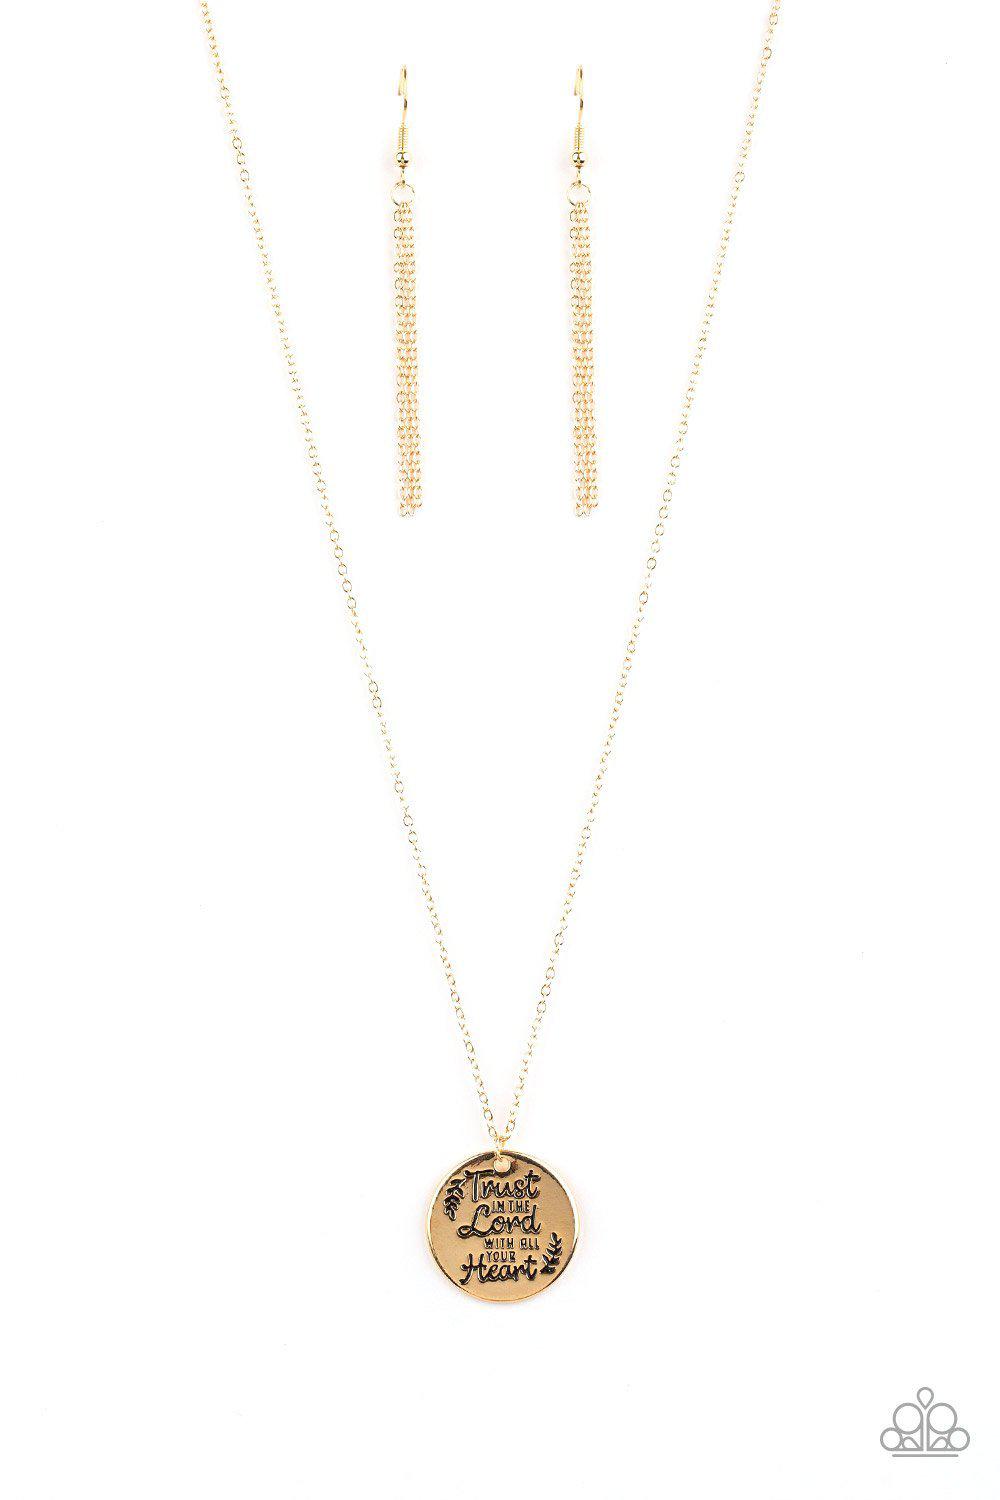 All You Need Is Trust Gold Necklace - Paparazzi Accessories-CarasShop.com - $5 Jewelry by Cara Jewels